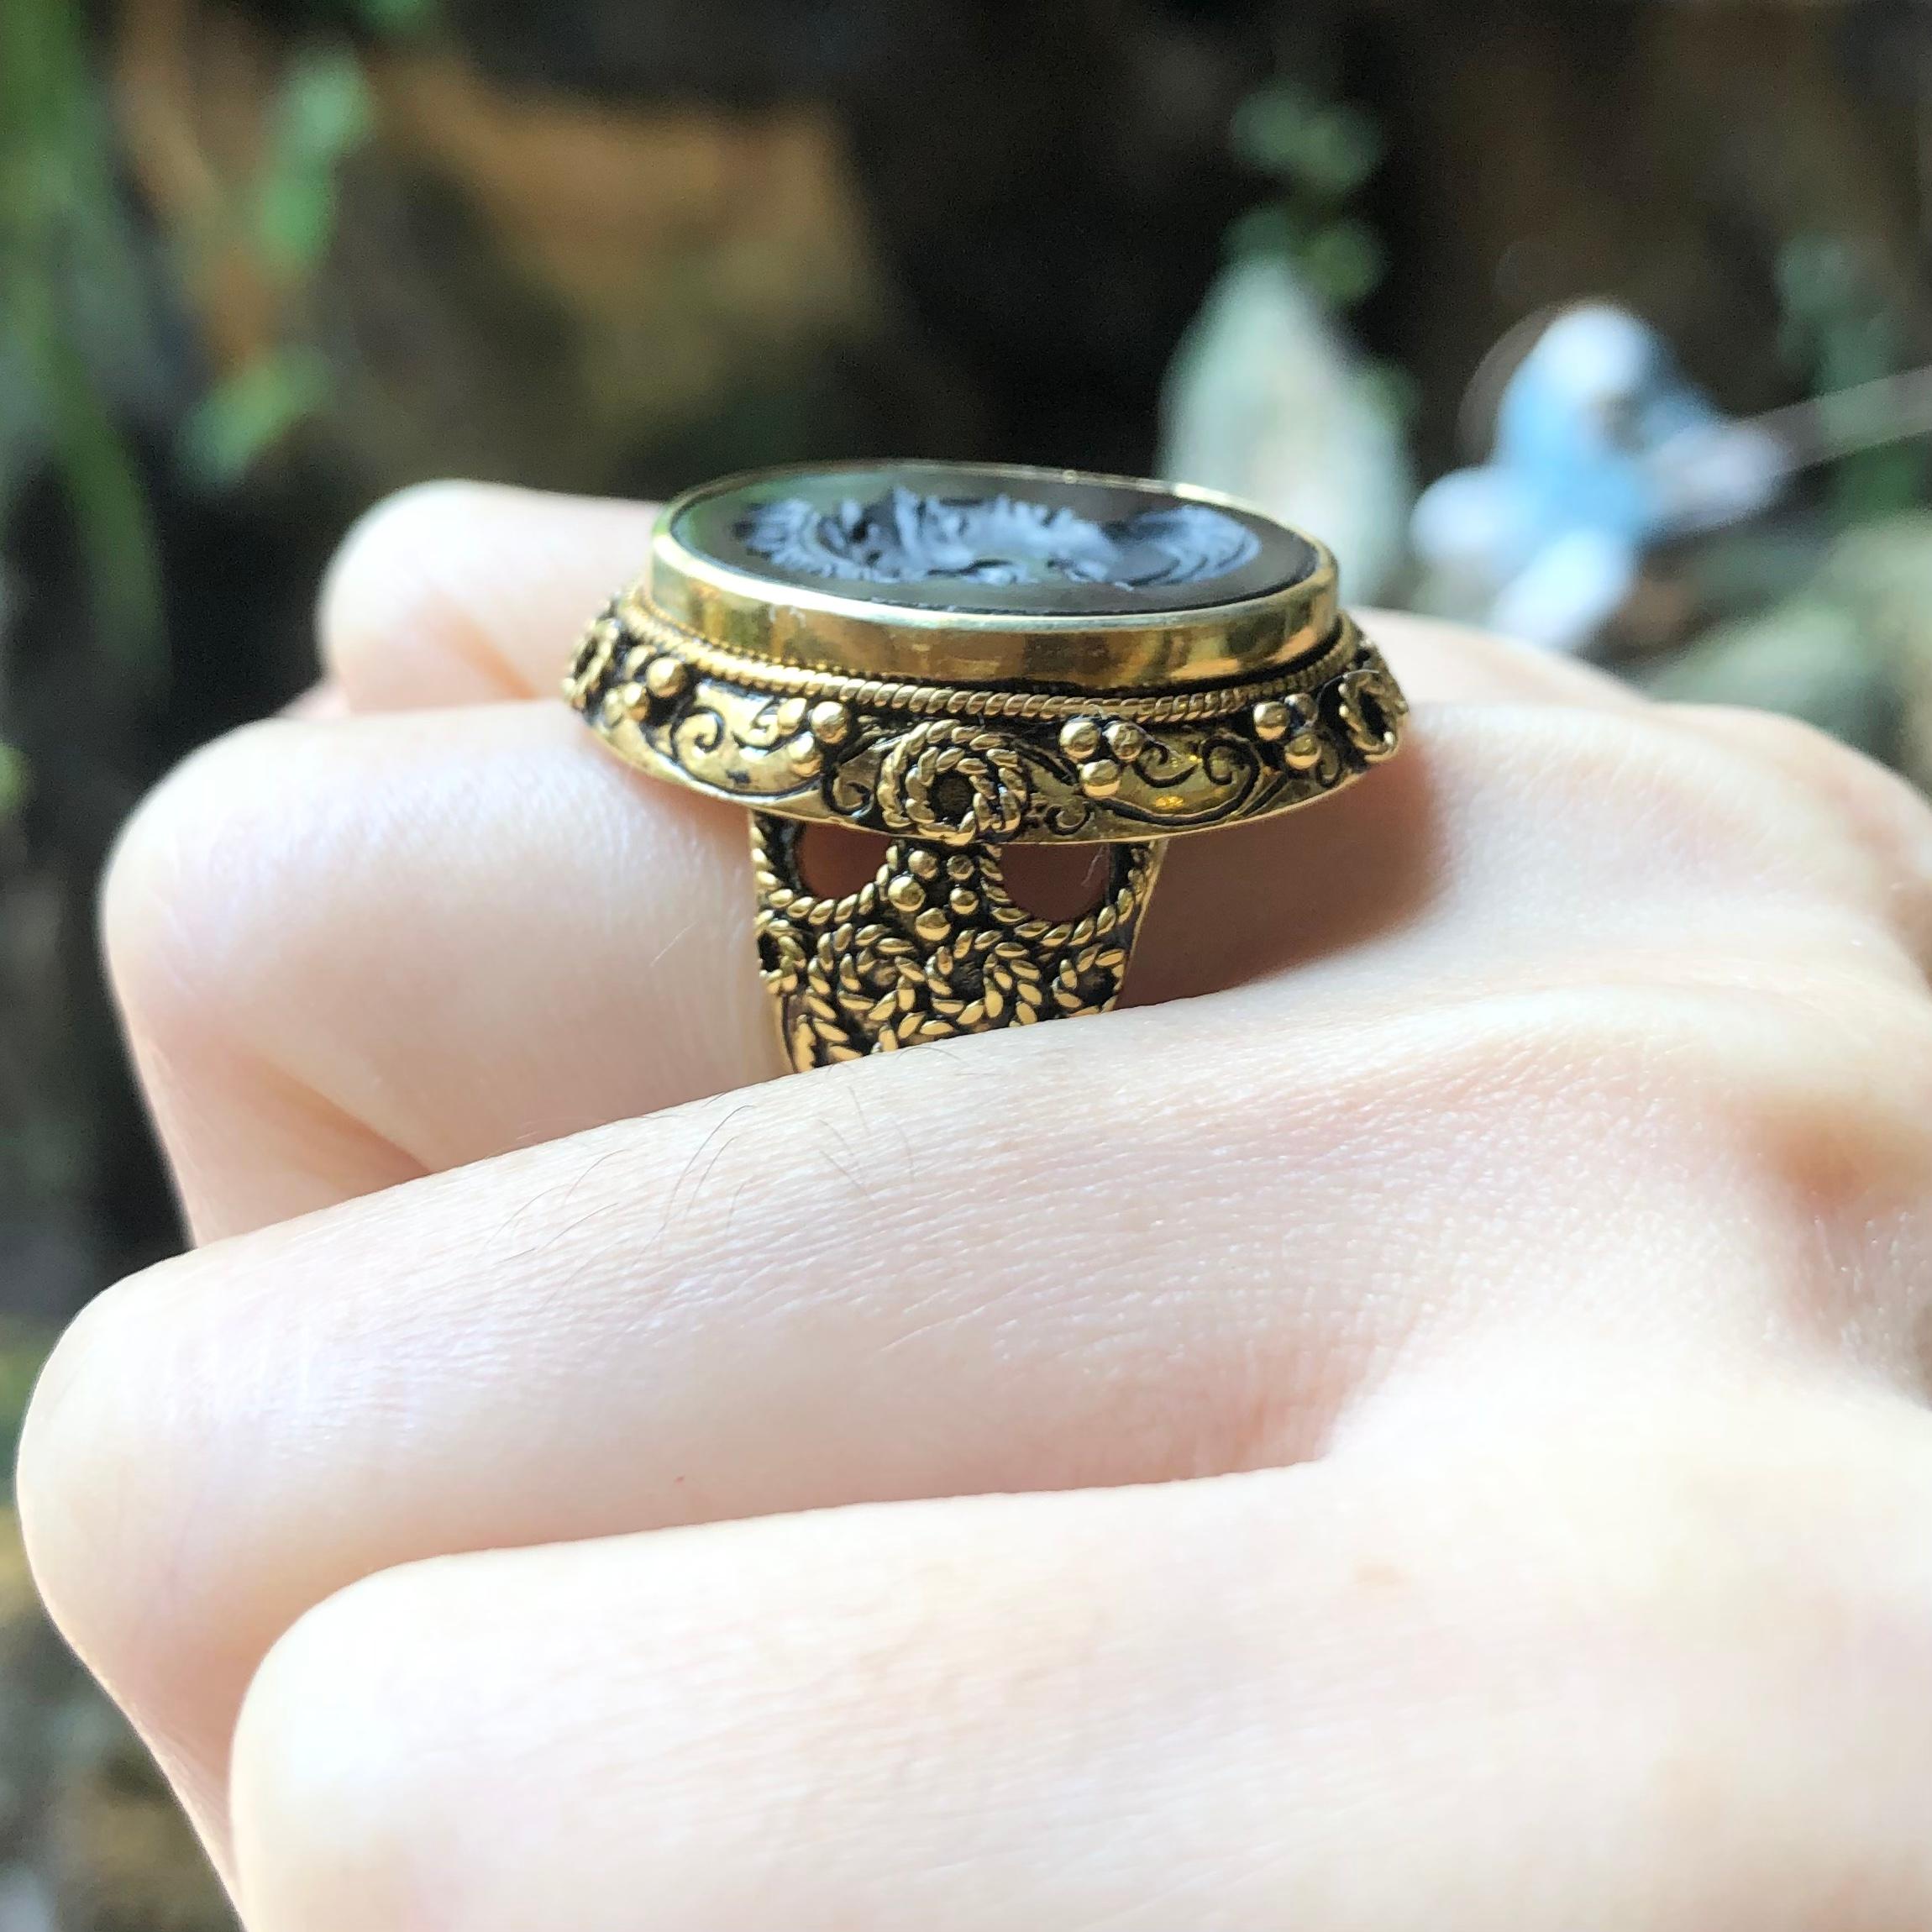 Onyx Ring  set in Silver Settings

Width:  2.1 cm 
Length: 2.8 cm
Ring Size: 58
Total Weight: 16.67 grams

*Please note that the silver setting is plated with gold to promote shine and help prevent oxidation.  However, with the nature of silver,